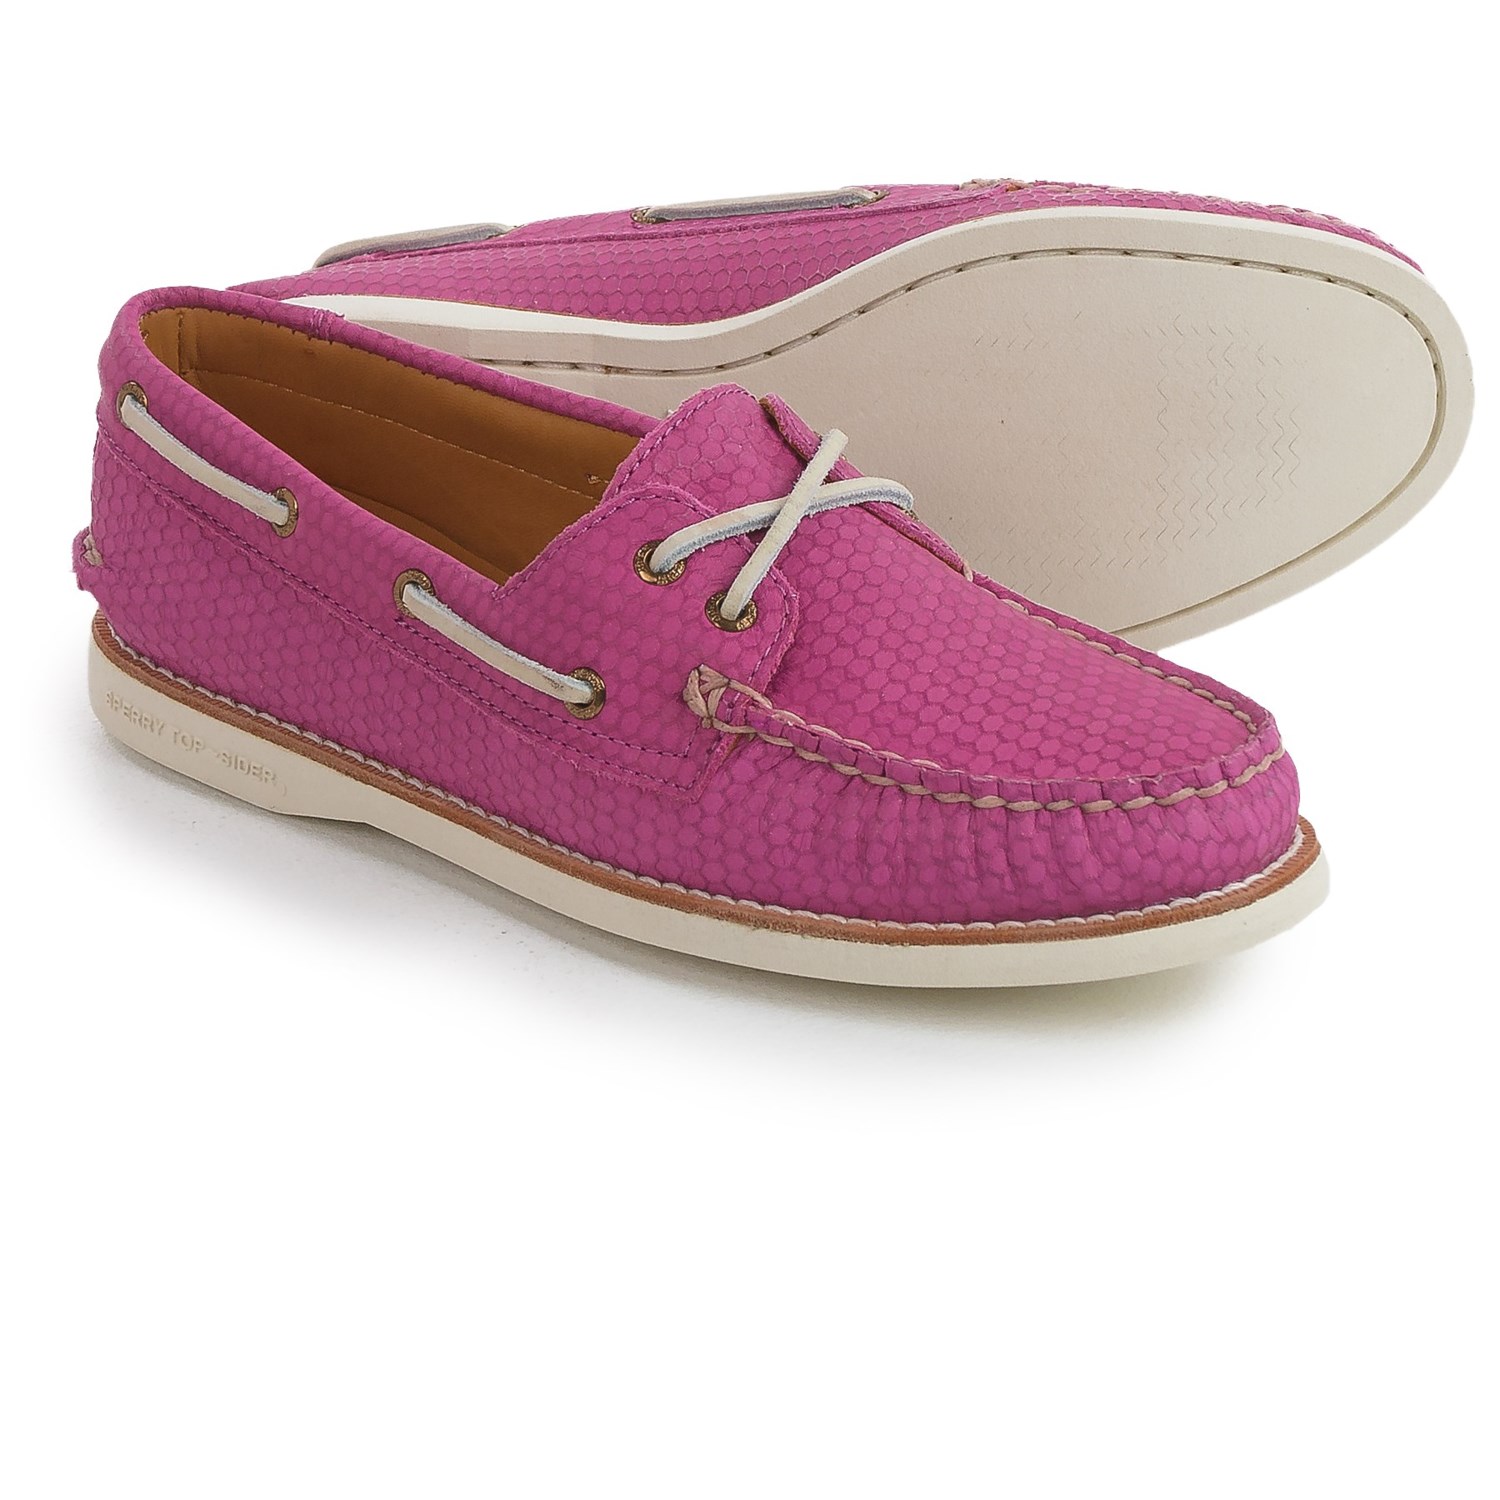 Sperry Gold Cup A/O Honeycomb Boat Shoes (For Women)